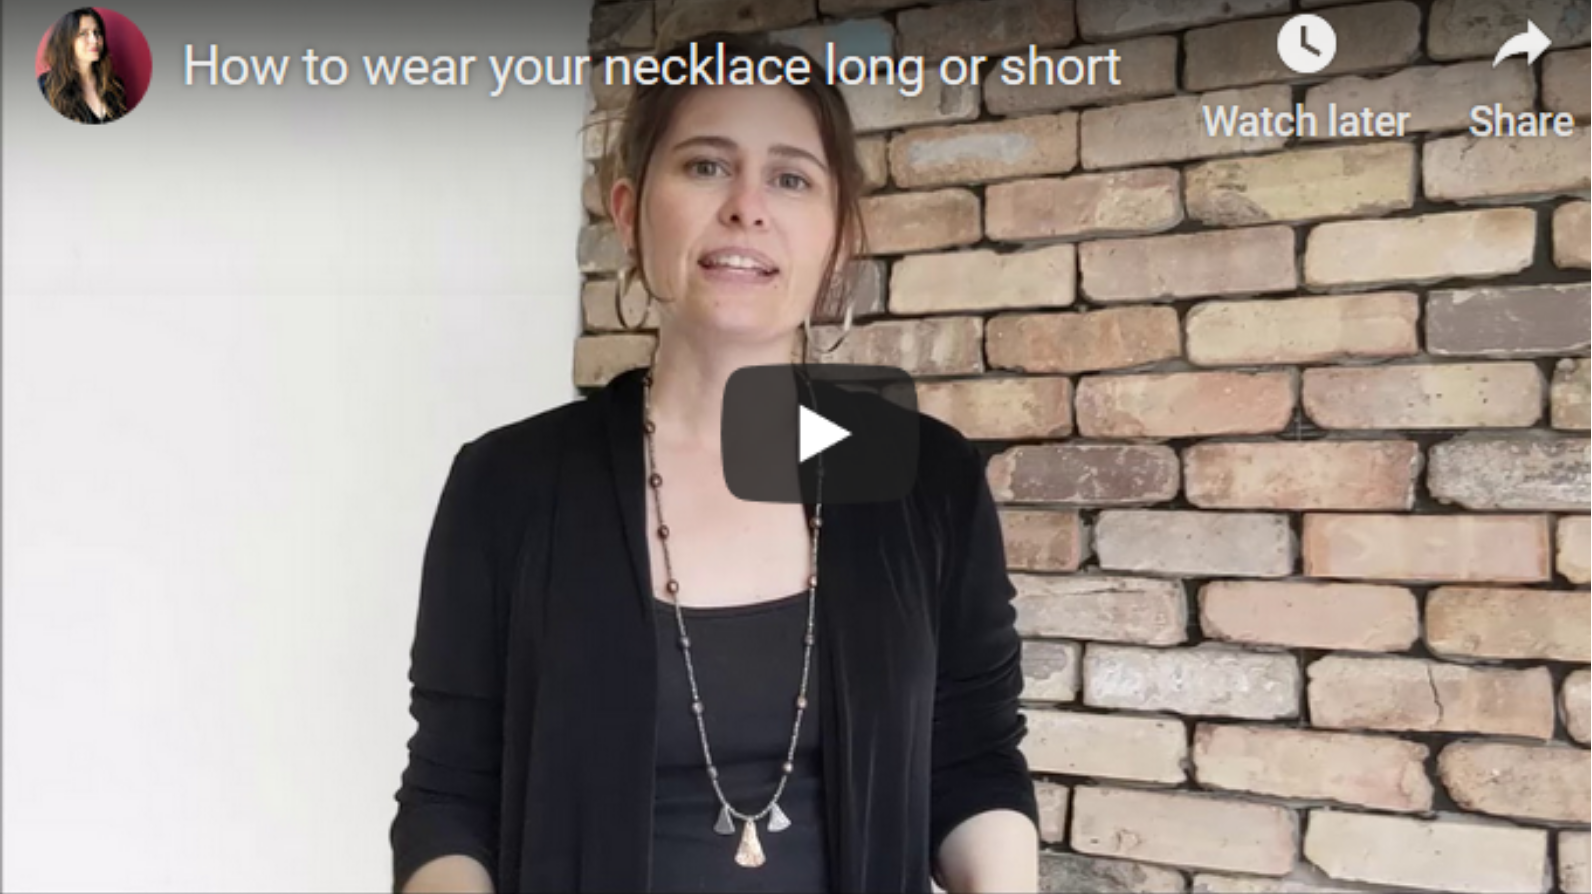 Double the fun: How to wear your necklace long or short